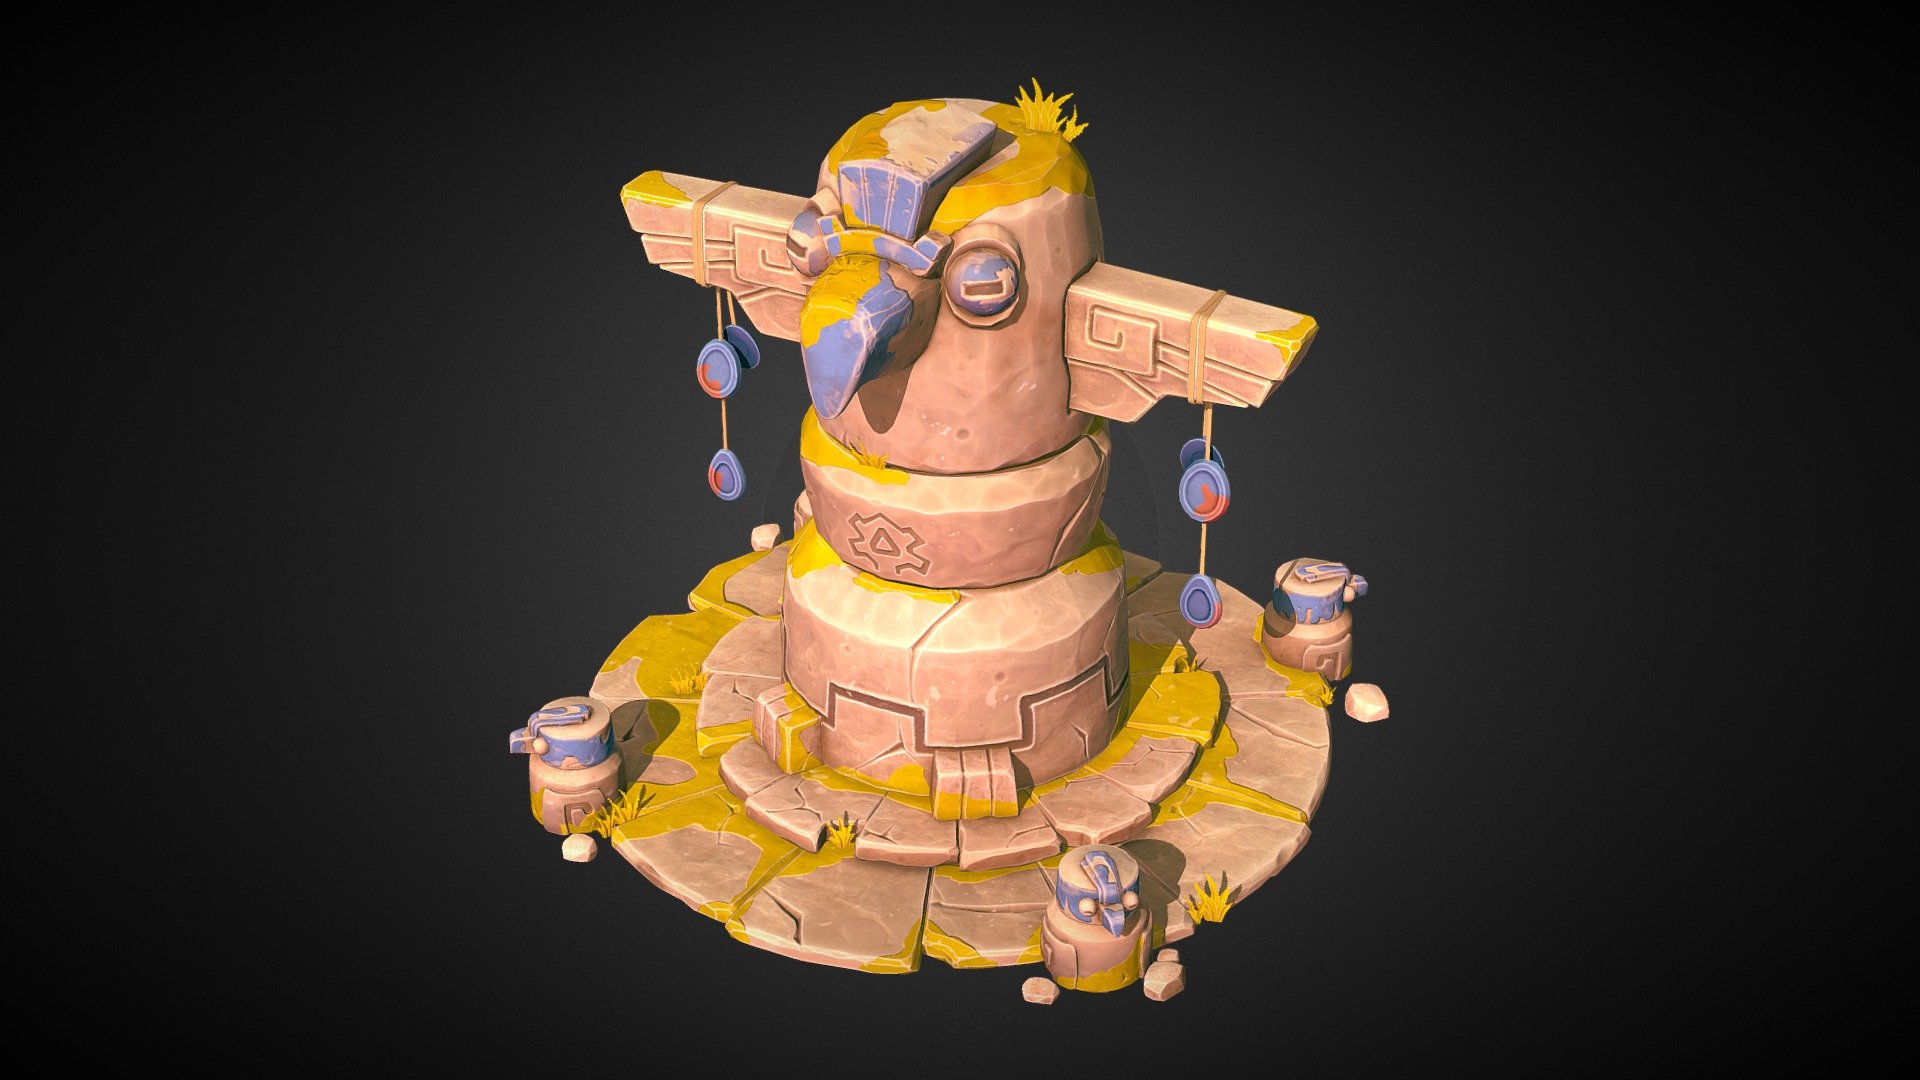 Hi! Tried to make a stylized totem on my free time. Hope you like it :)
Concept by ANfei YU. 

Here is my artstation profile;
https://www.artstation.com/ozcanburak8 - Stylized Totem 01 - Download Free 3D model by Burak Özcan (@ozcanburak8) 3d model